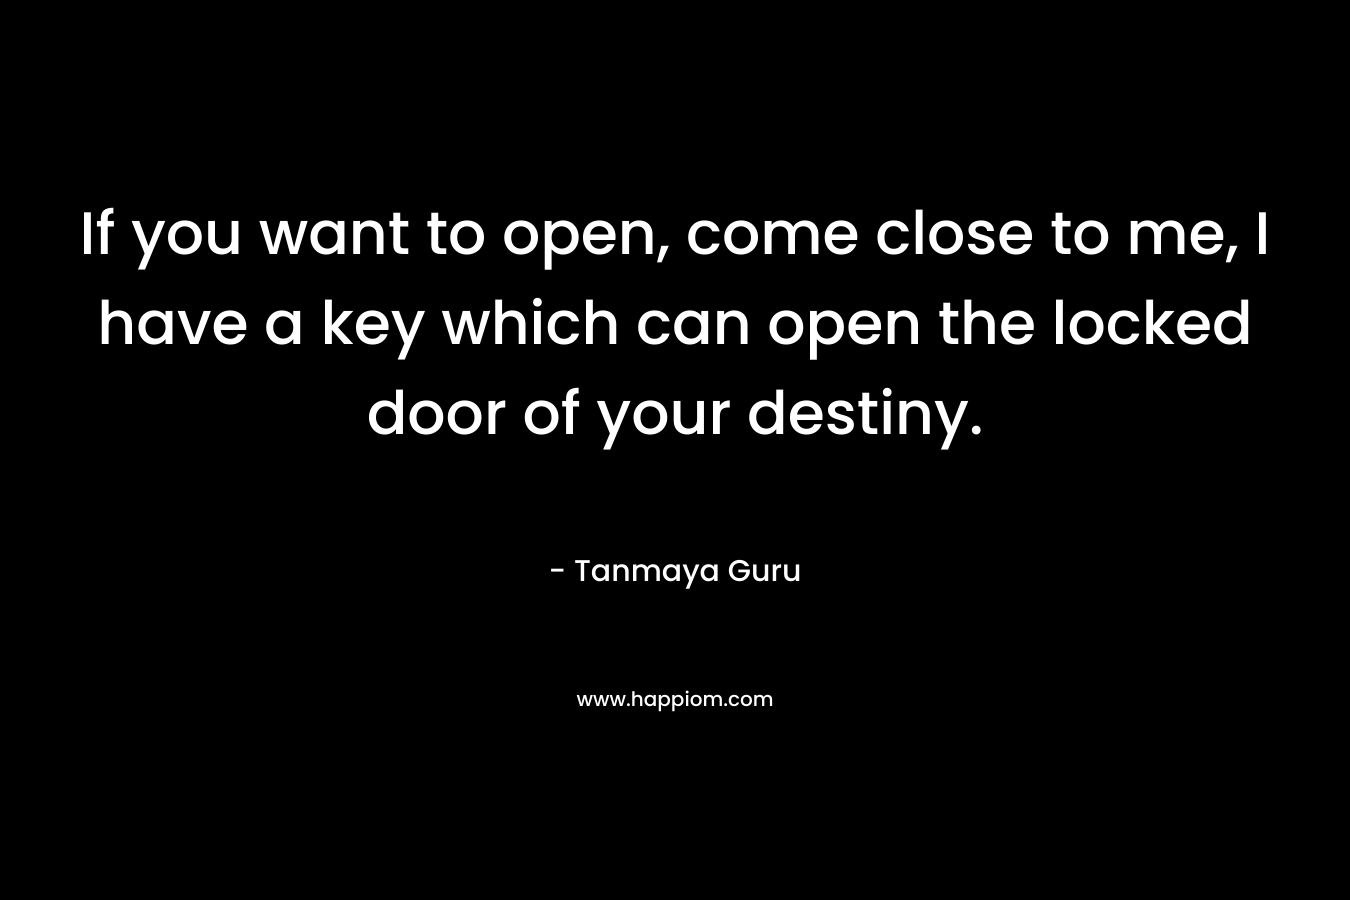 If you want to open, come close to me, I have a key which can open the locked door of your destiny.